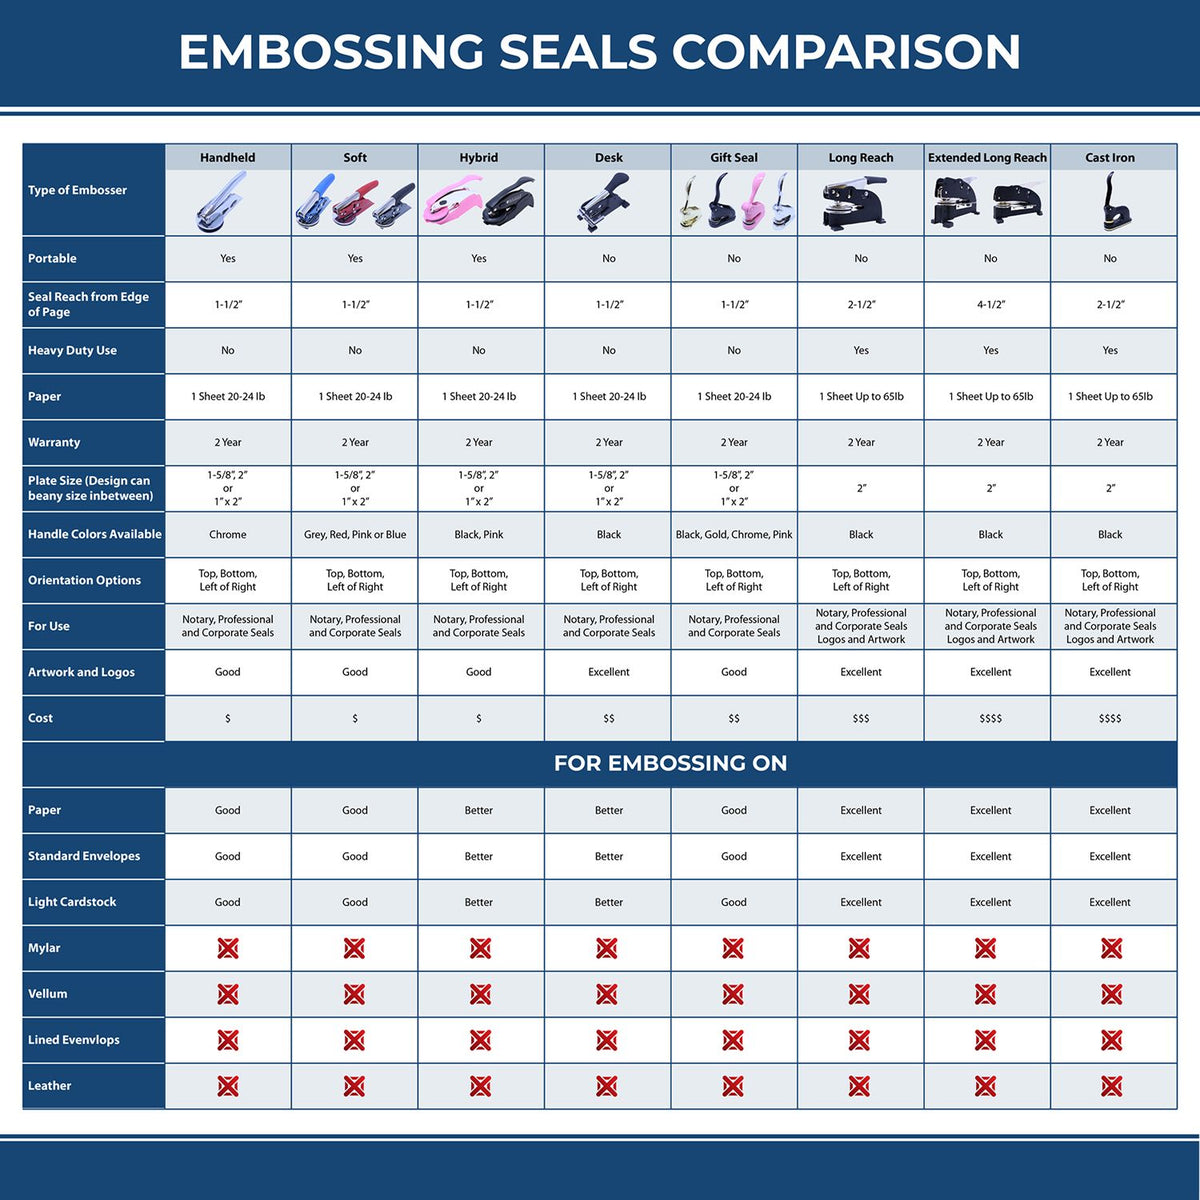 A comparison chart for the different types of mount models available for the Heavy Duty Cast Iron Washington Engineer Seal Embosser.